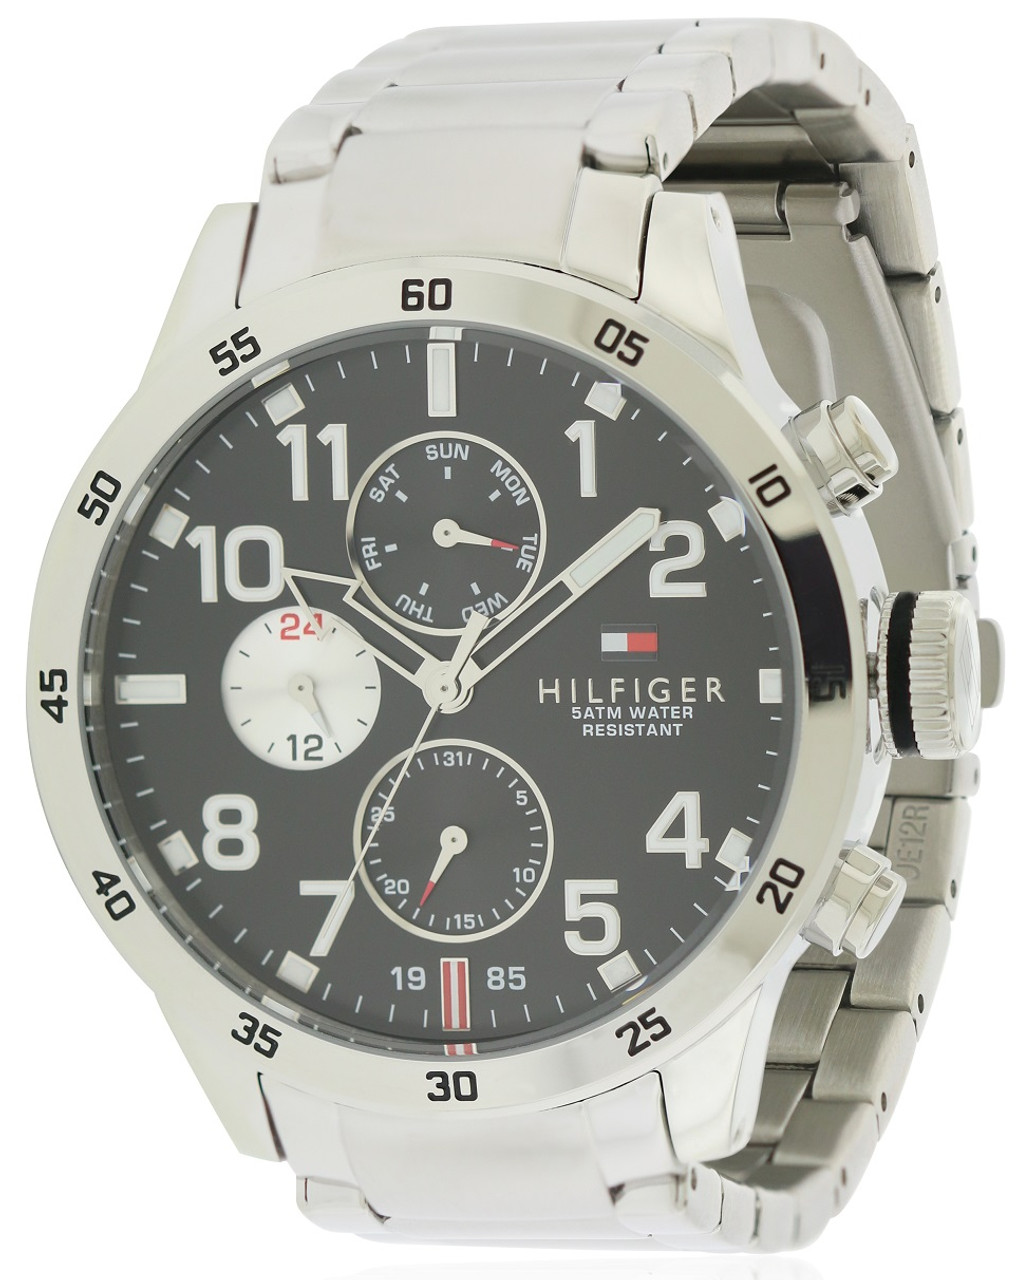 Tommy Hilfiger Stainless Steel Mens Watch 1791141 - Jacob Time Inc